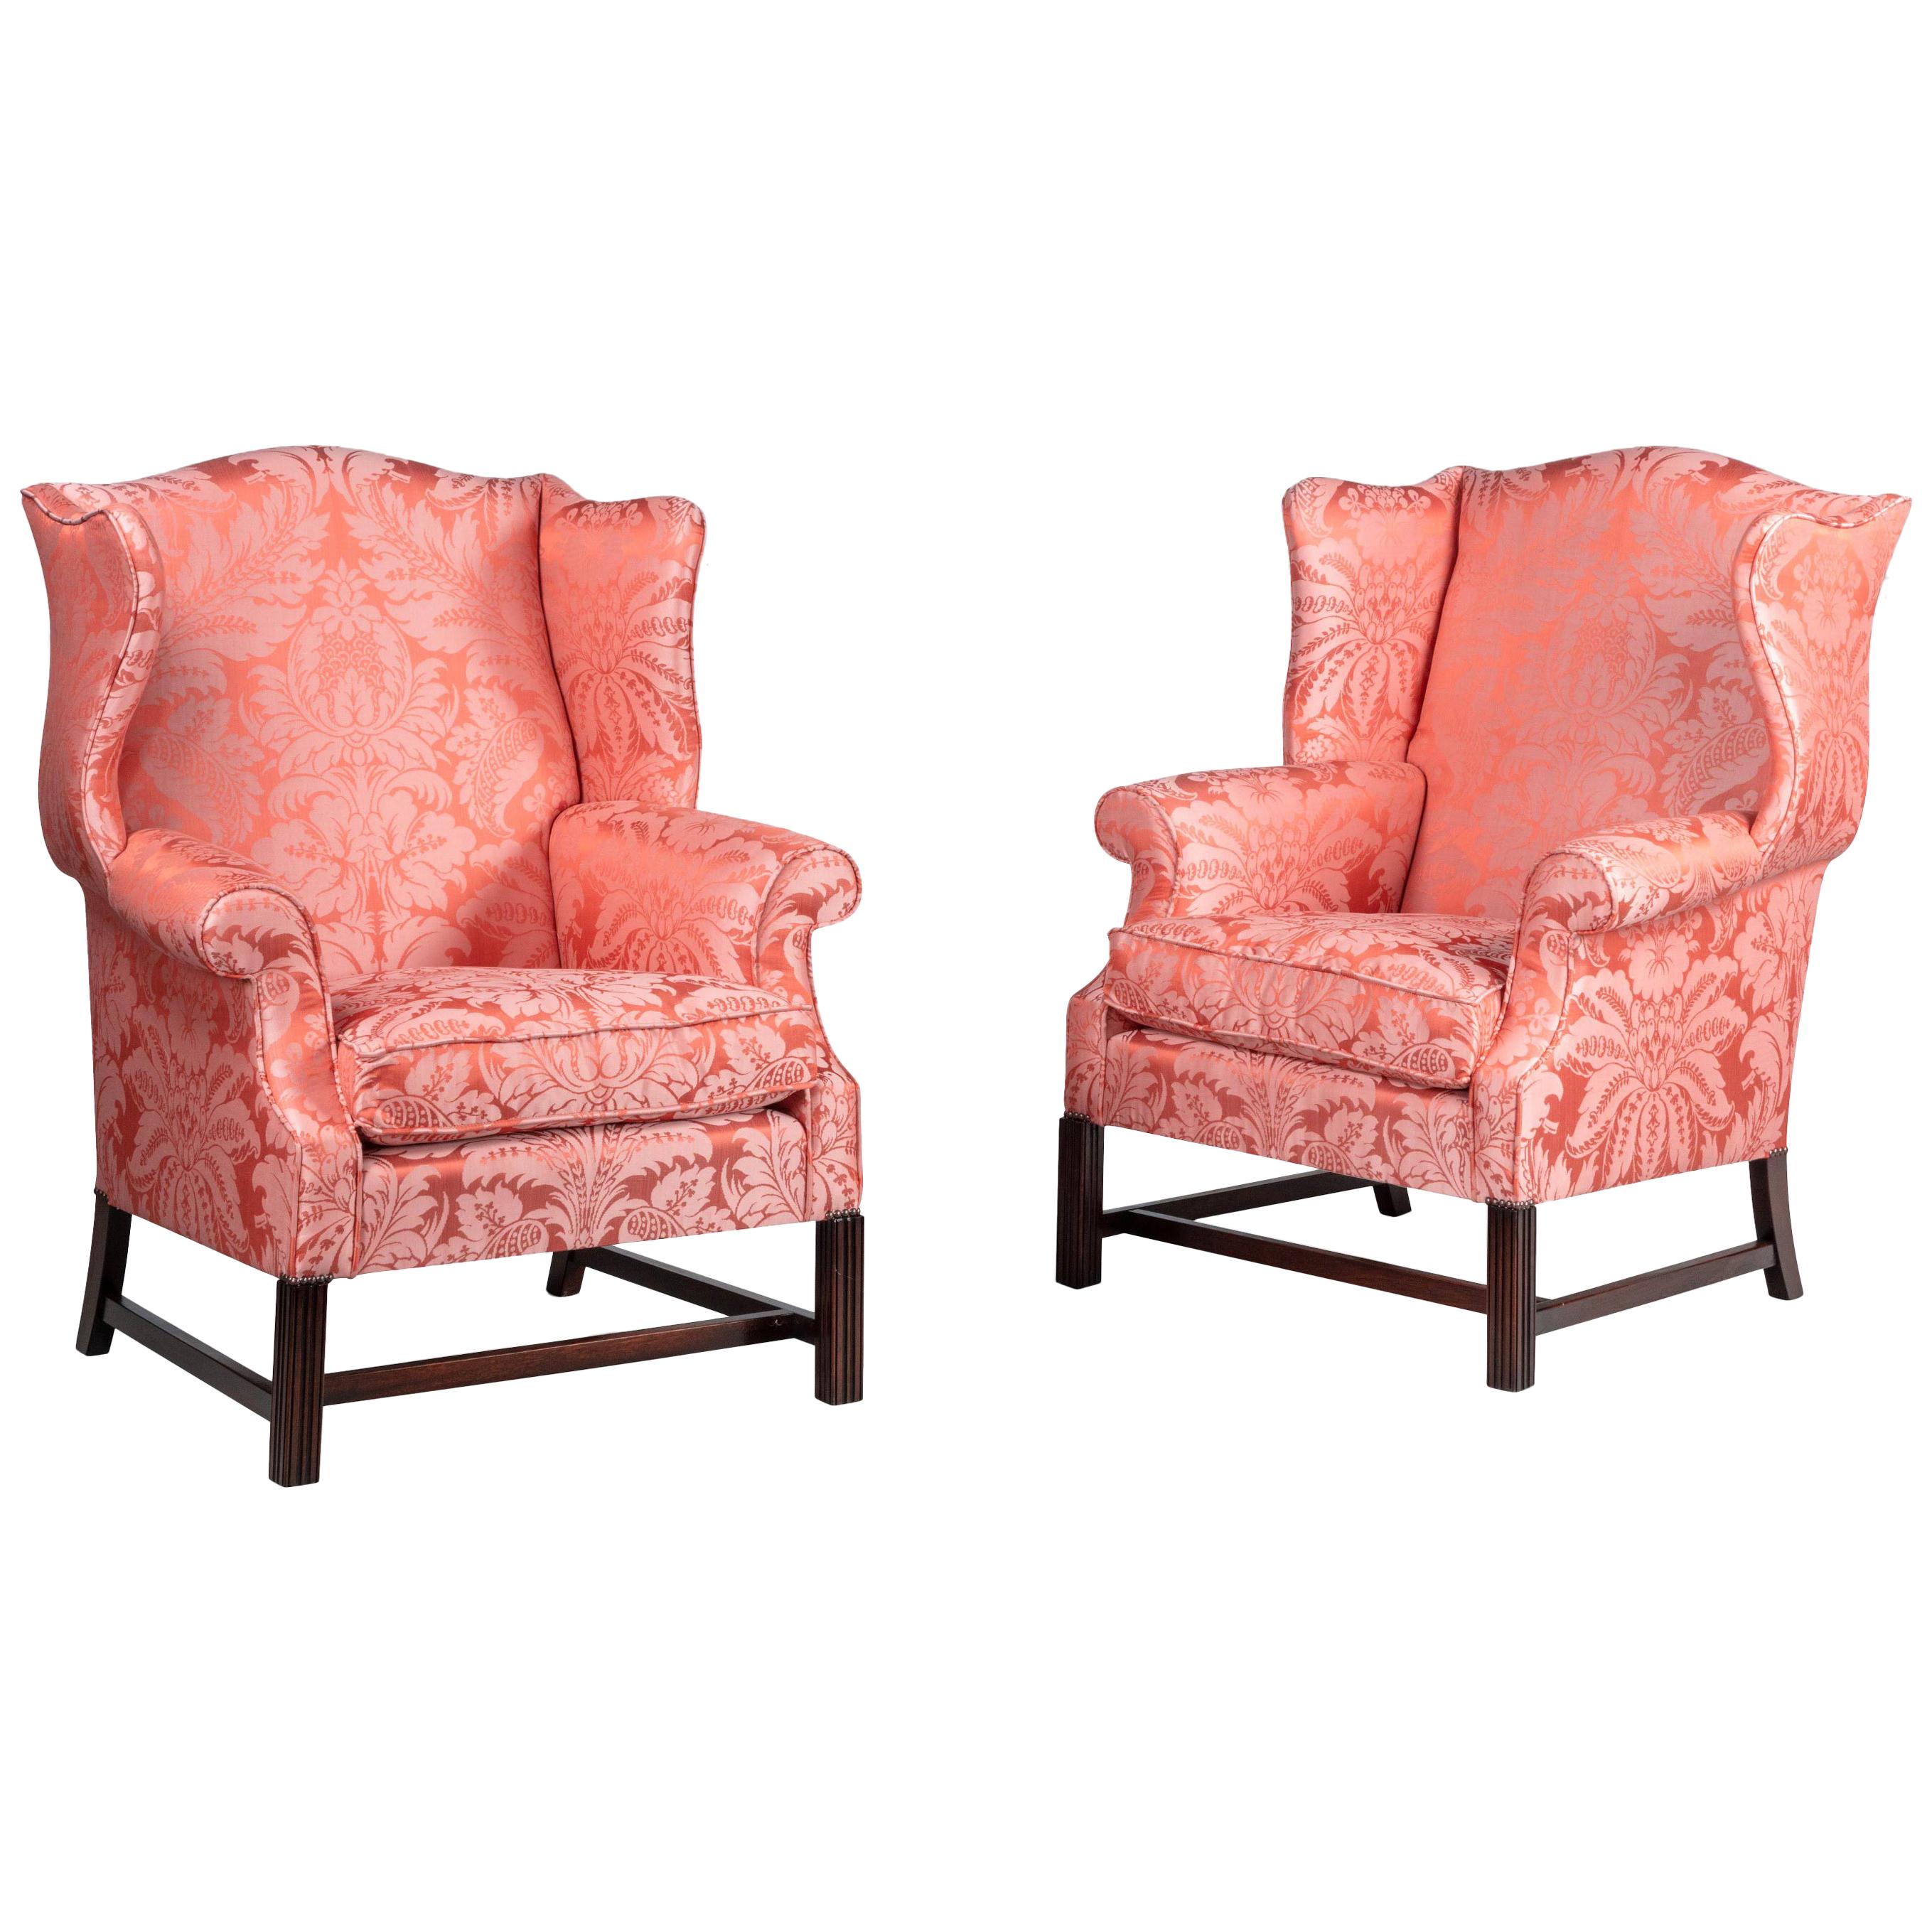 Attractive Pair of Modern Mahogany Framed Wing Chairs